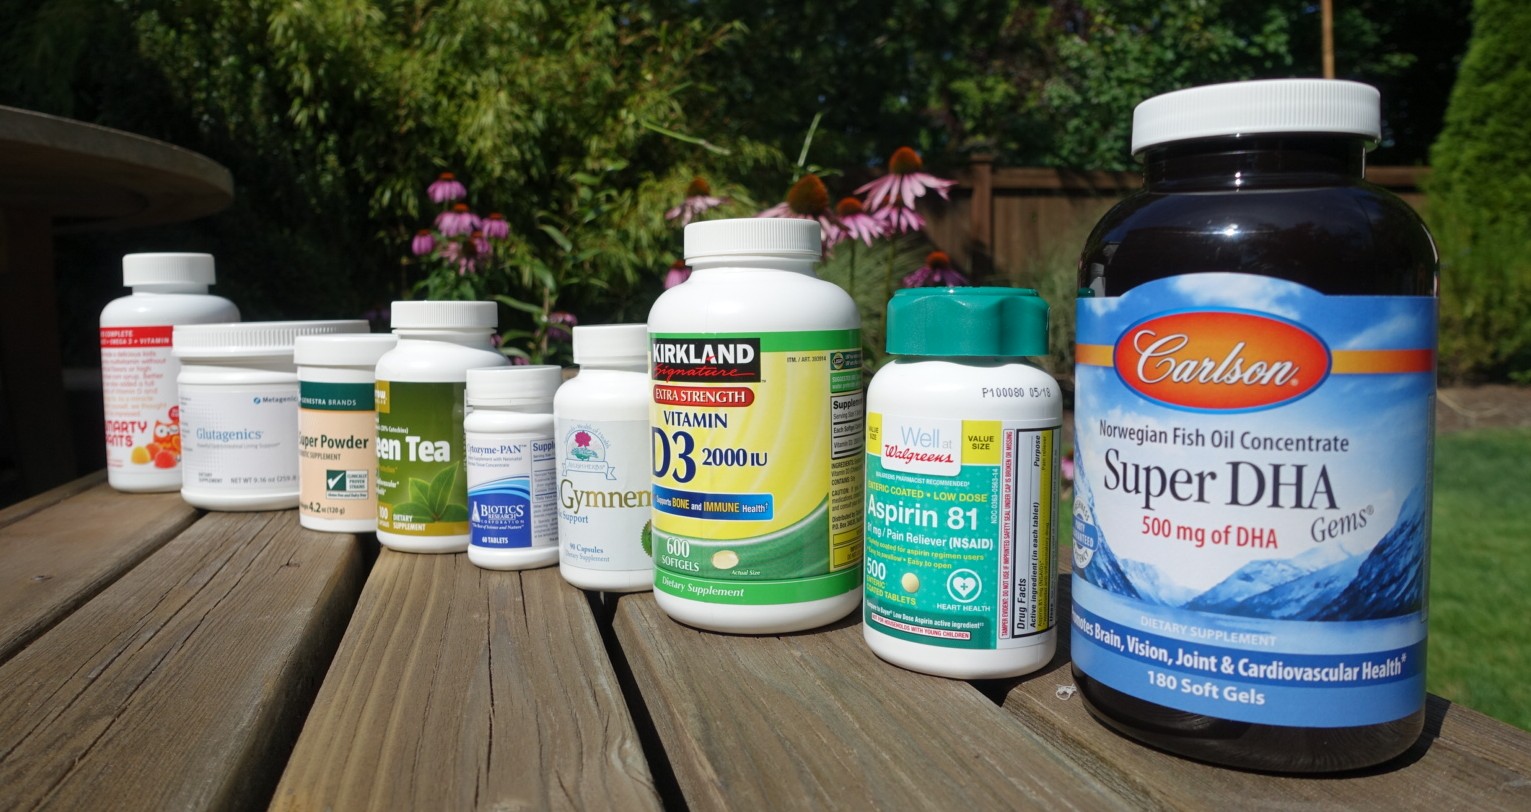 Our supplement collection